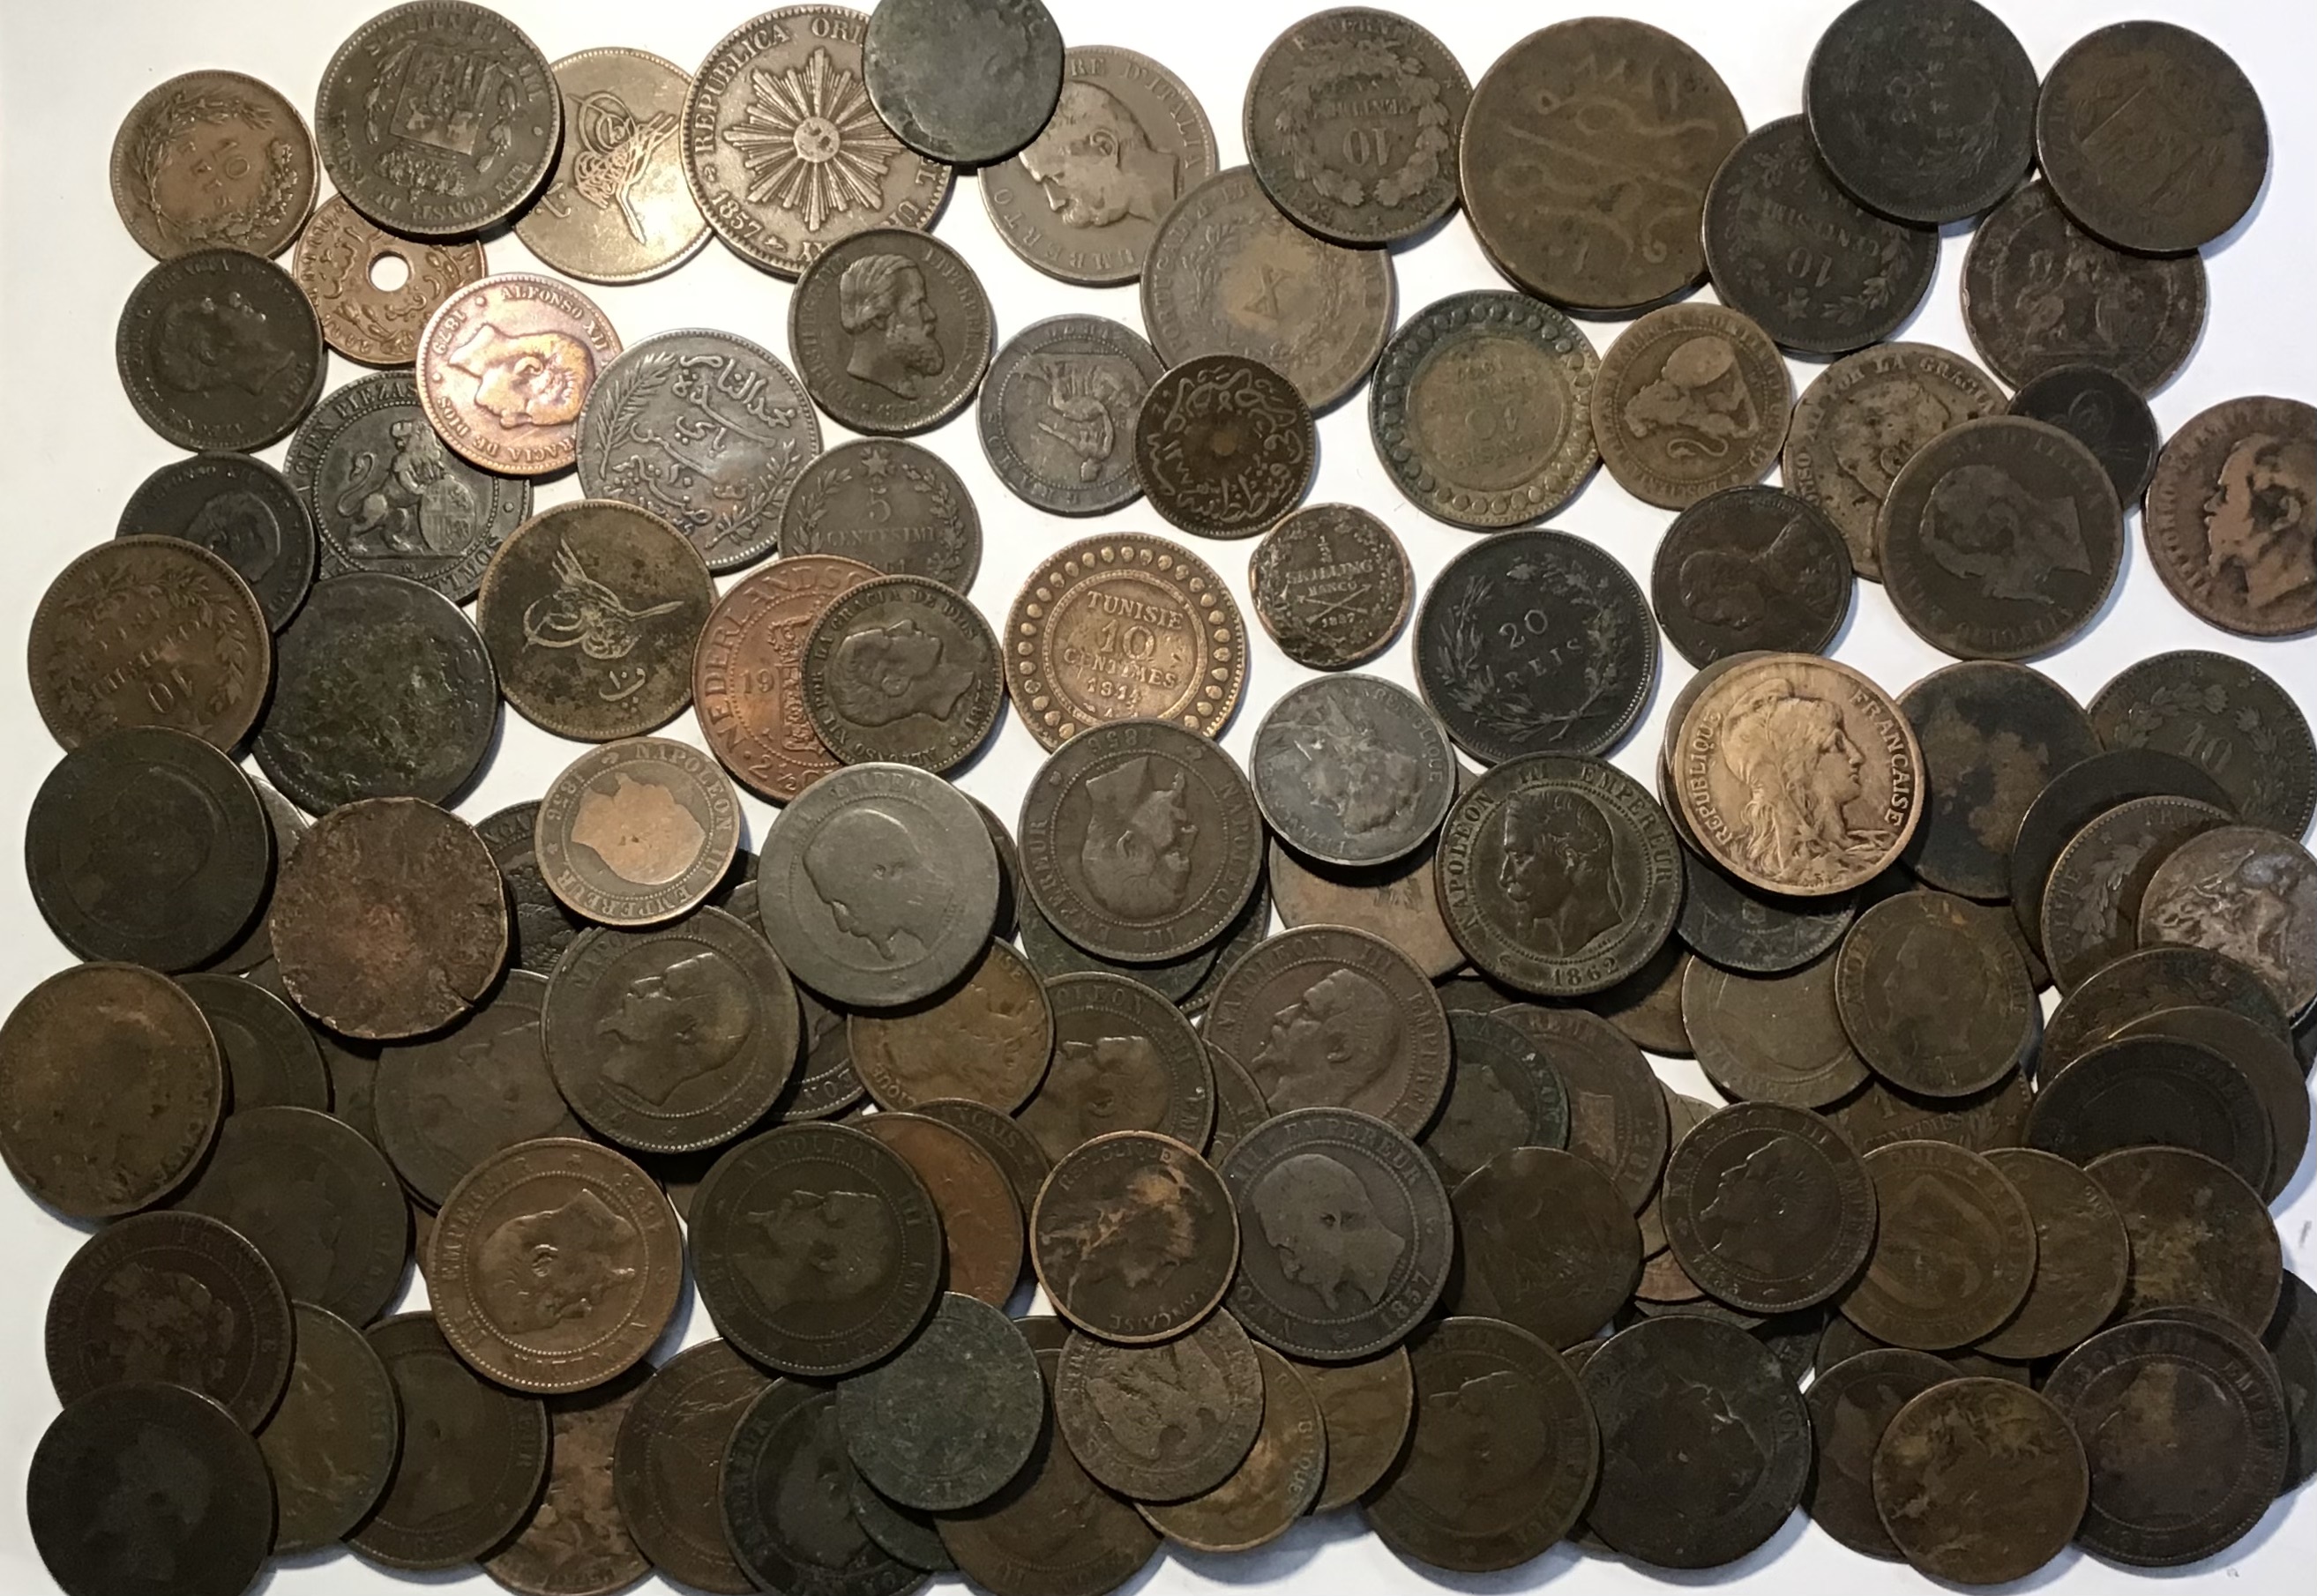 Collection of Older World Copper Coins with a large amount of French Copper/bronze coins.